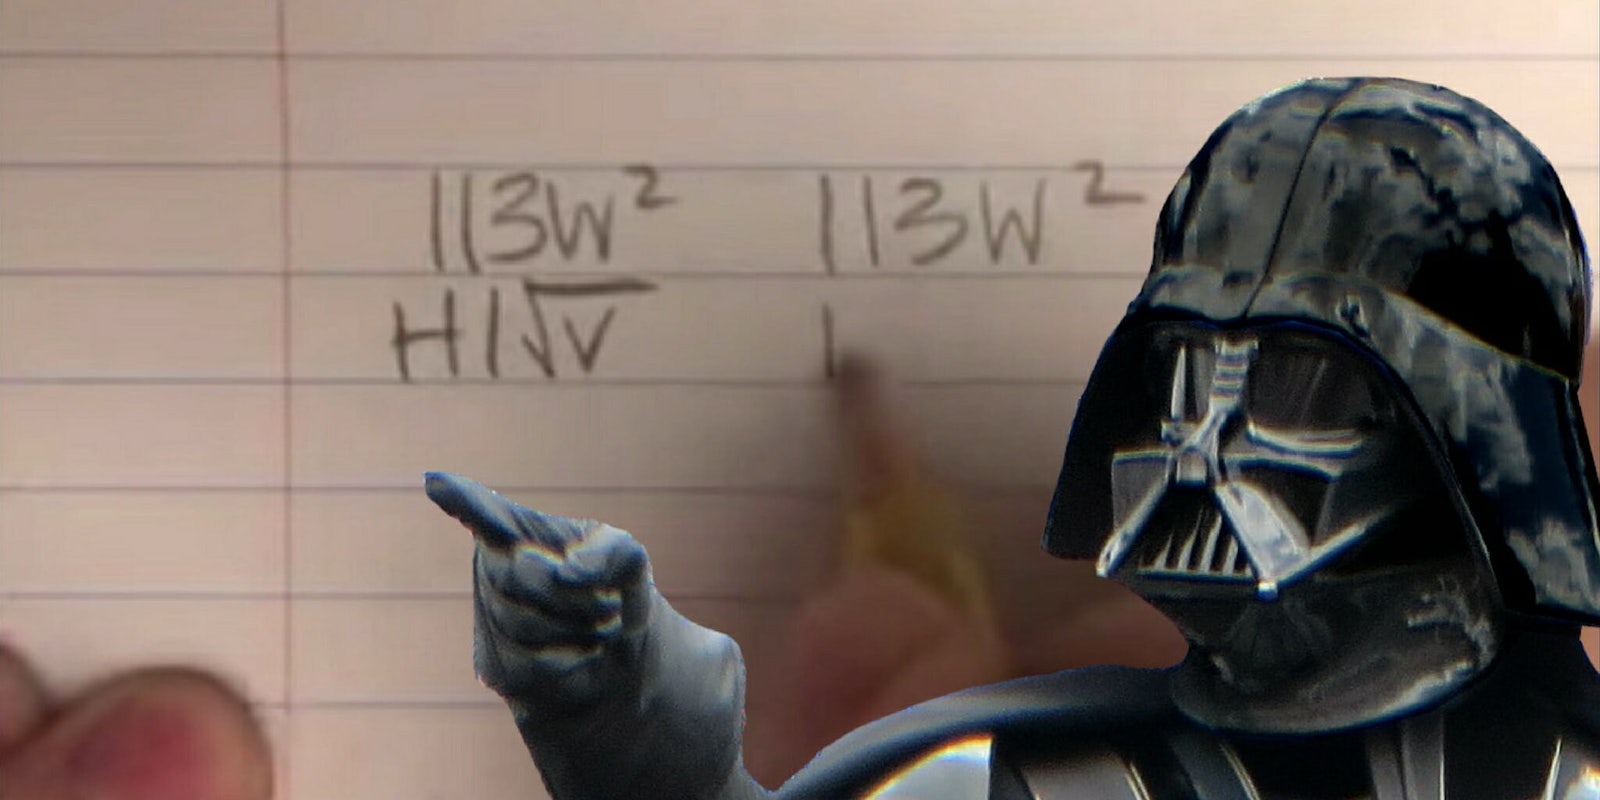 Teen Dani Ochoa 'plays' 'Star Wars's Imperial March theme song with a pencil and paper while Darth Vader looms over the drawing.